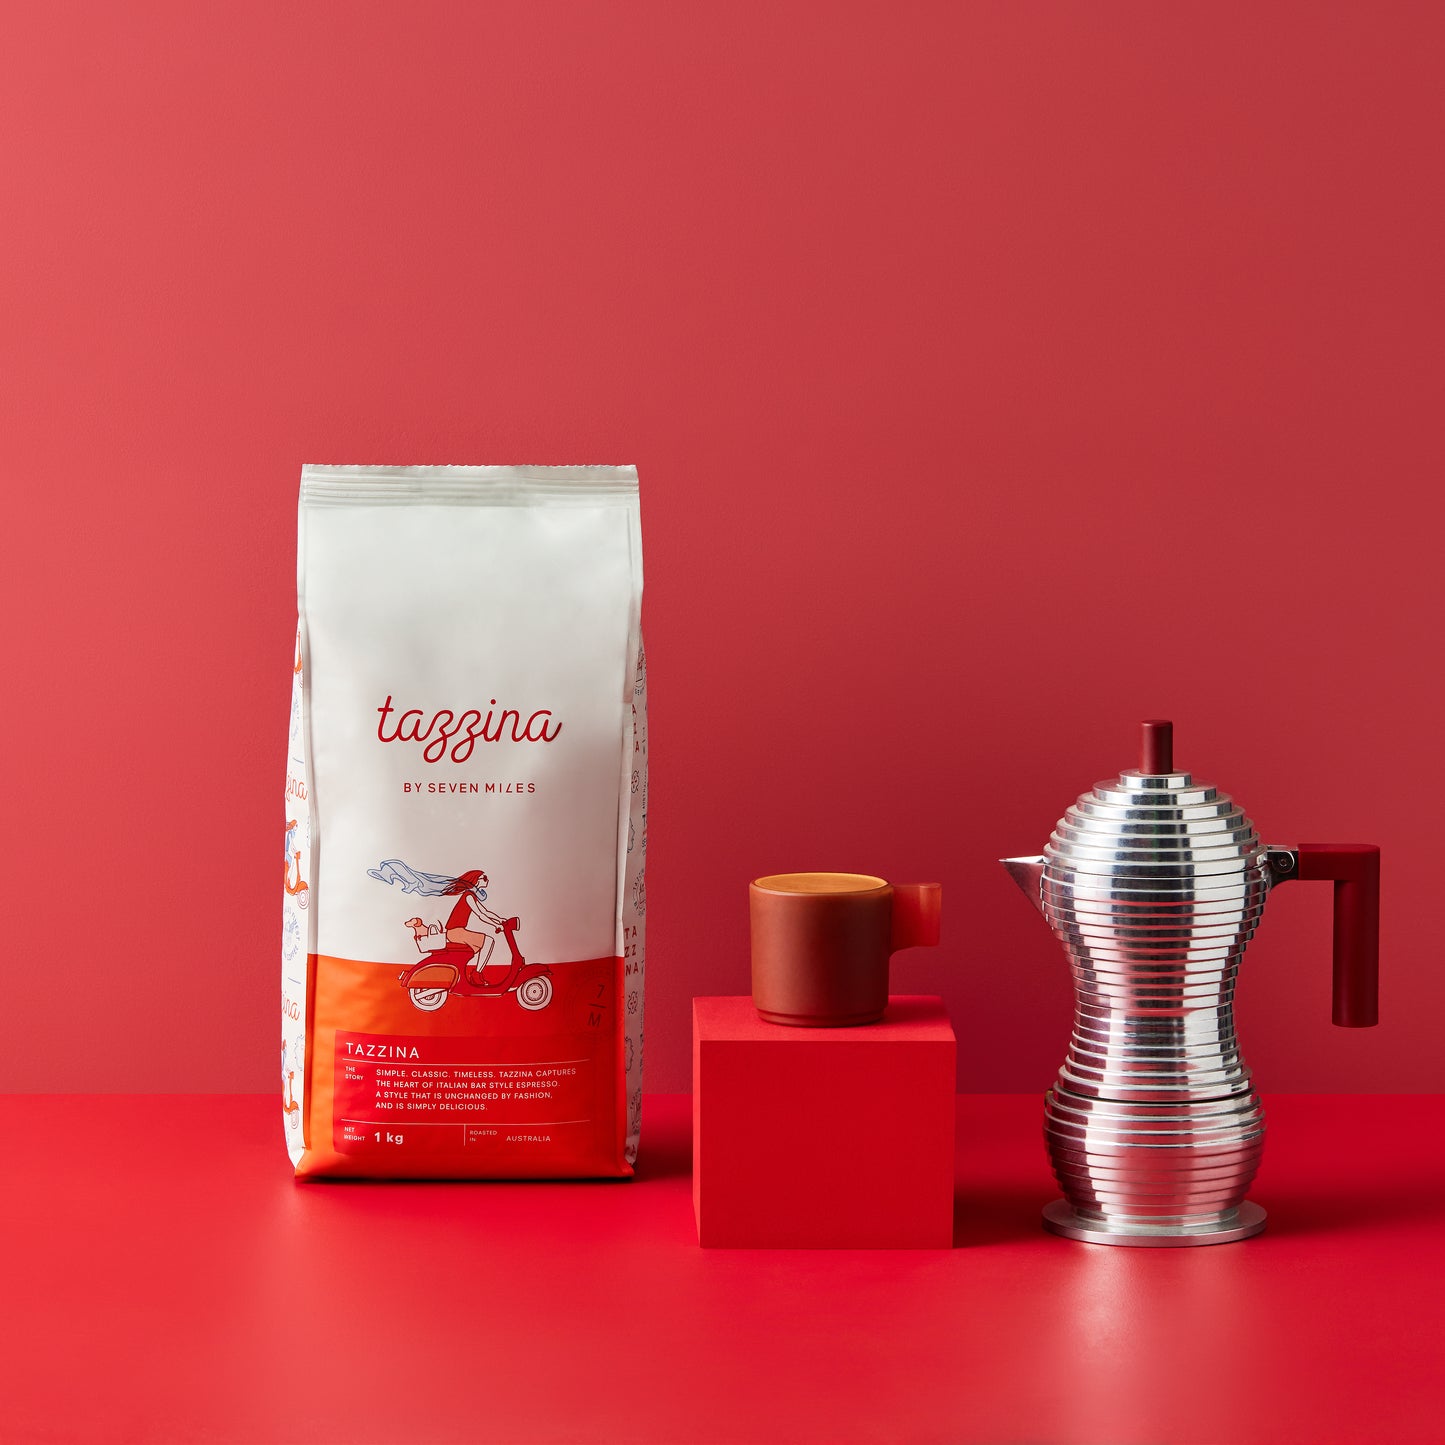 The Trattoria blend is less punchy than Cafe Blend, but retains the distinctive hallmarks of a classic Italian espresso. This blend features full bodied notes of cocoa and juicy berries with lingering flavours of caramel, vanilla and sweet spices.